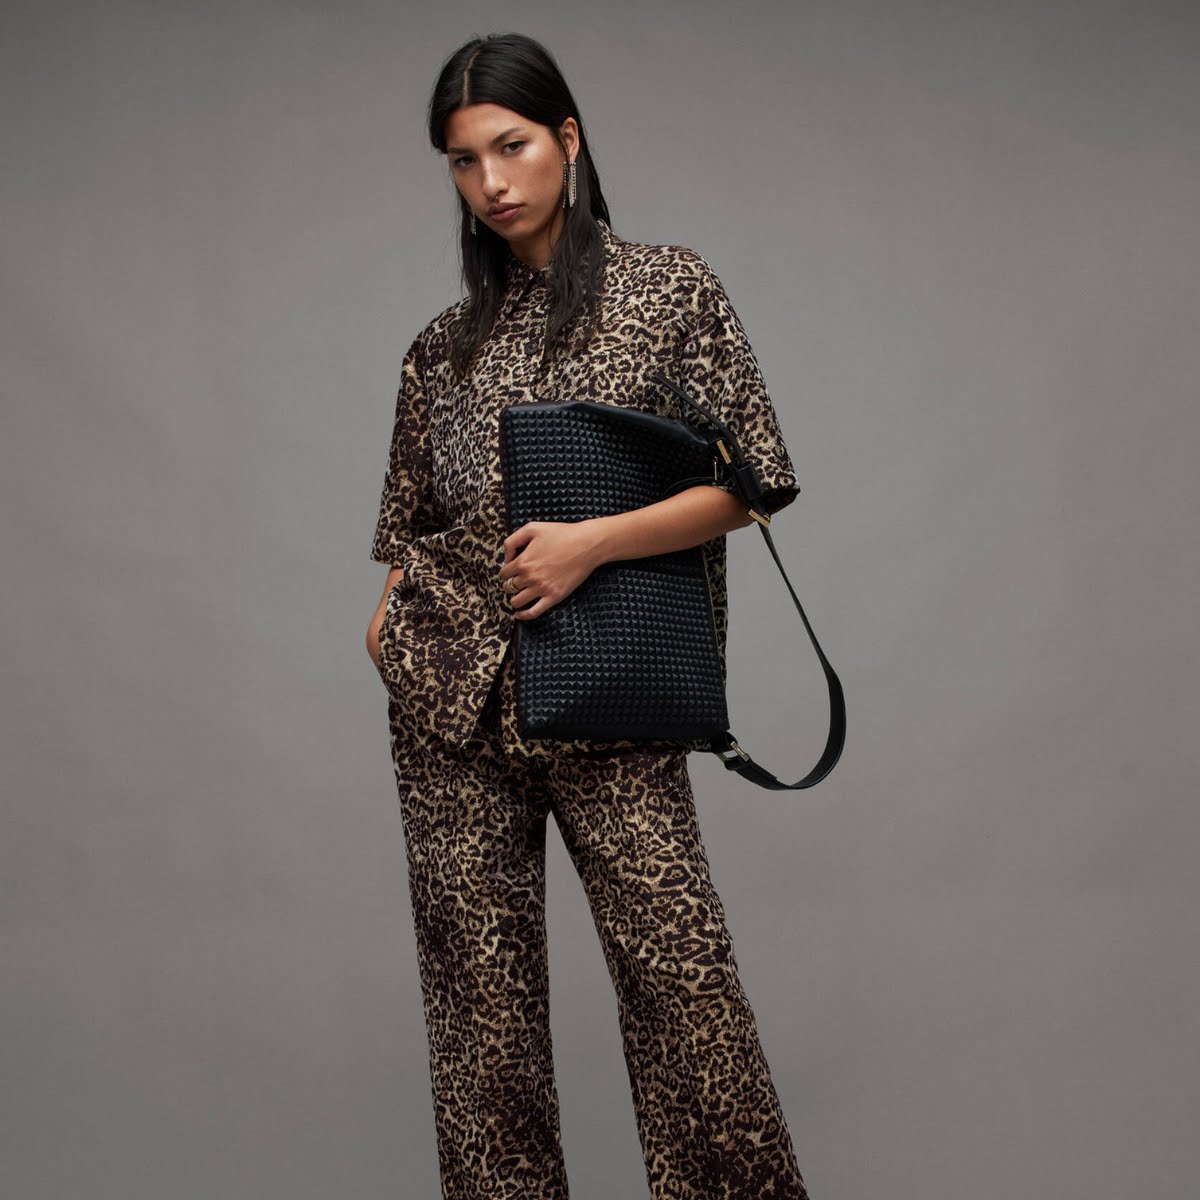 Take a walk on the wild side in leopard print | IMAGE.ie